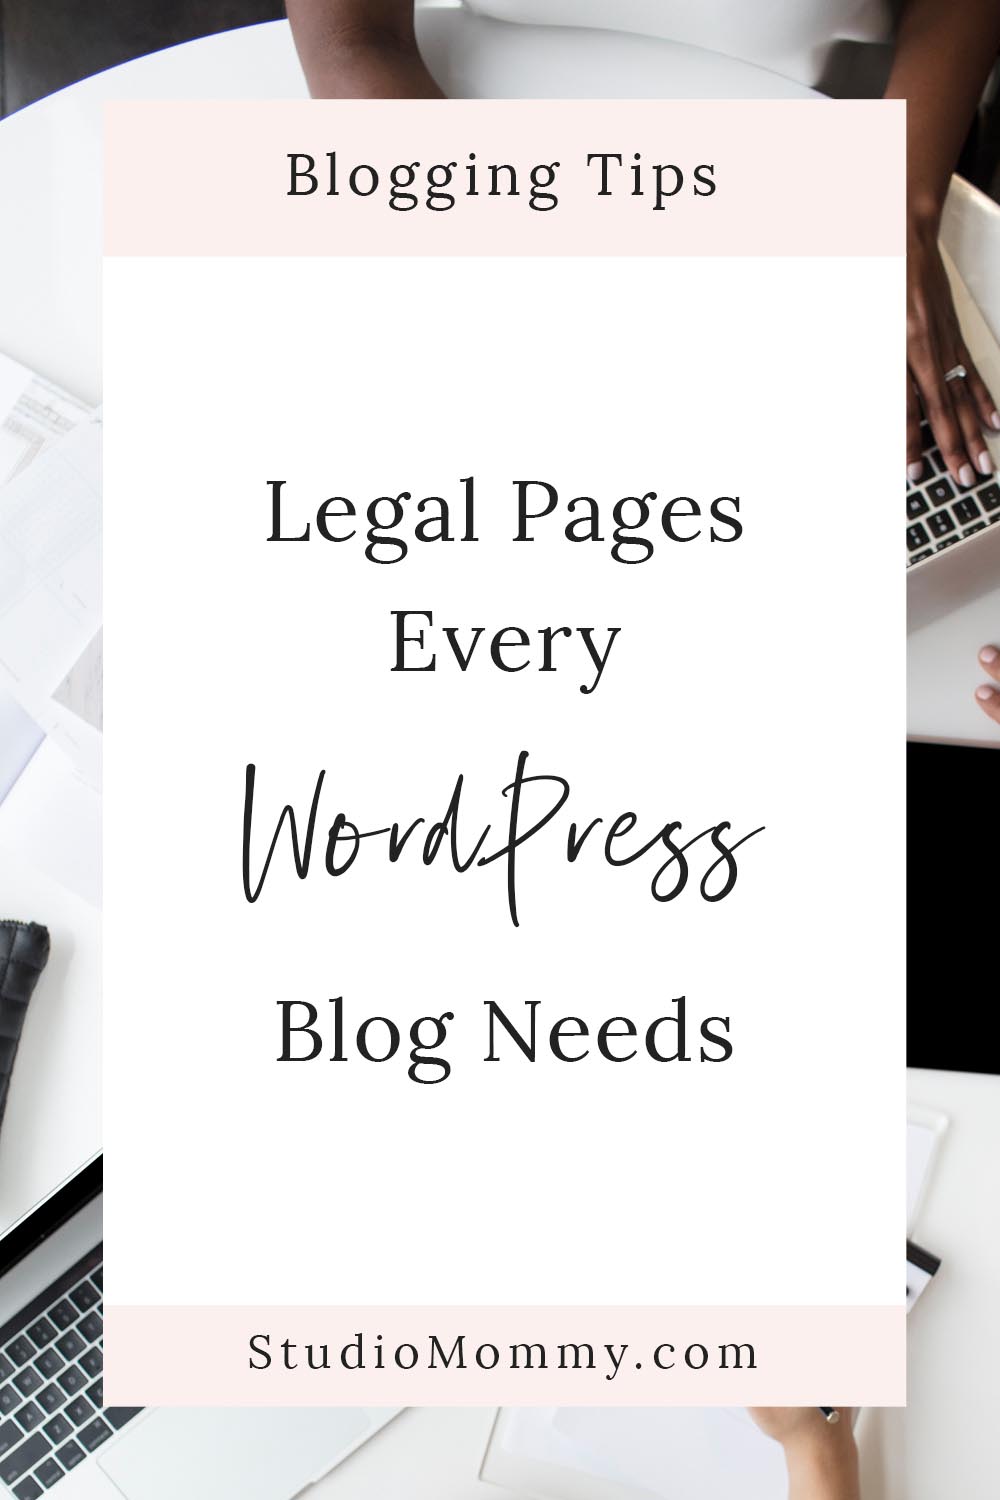 Legal Pages Every WordPress Blog Needs